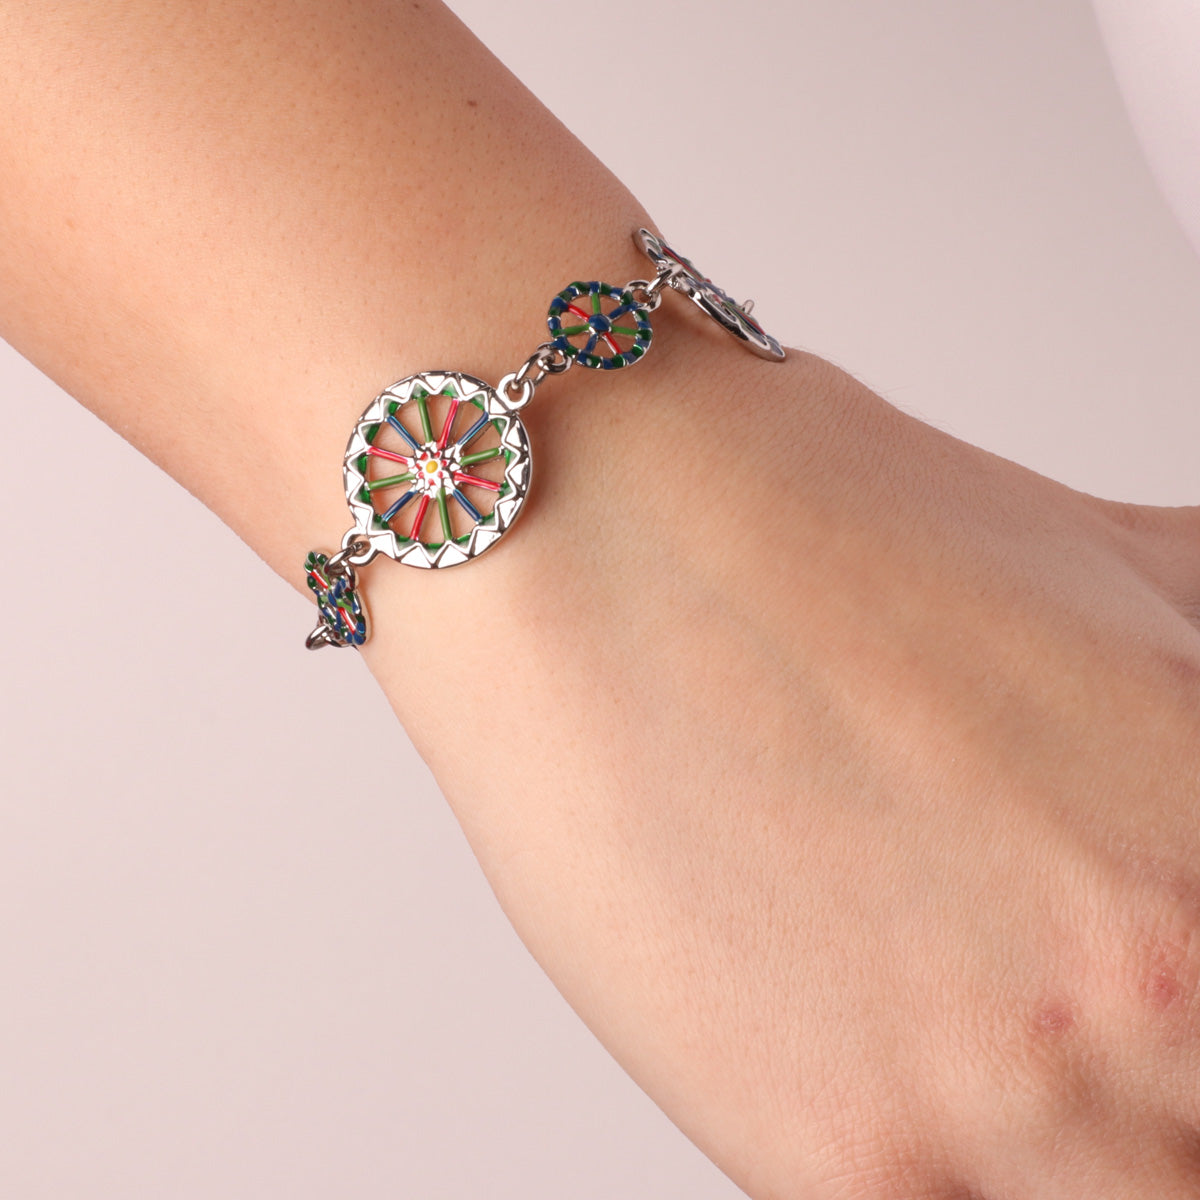 Metal bracelet with wheels of the Sicilian cart embellished with colored glazes